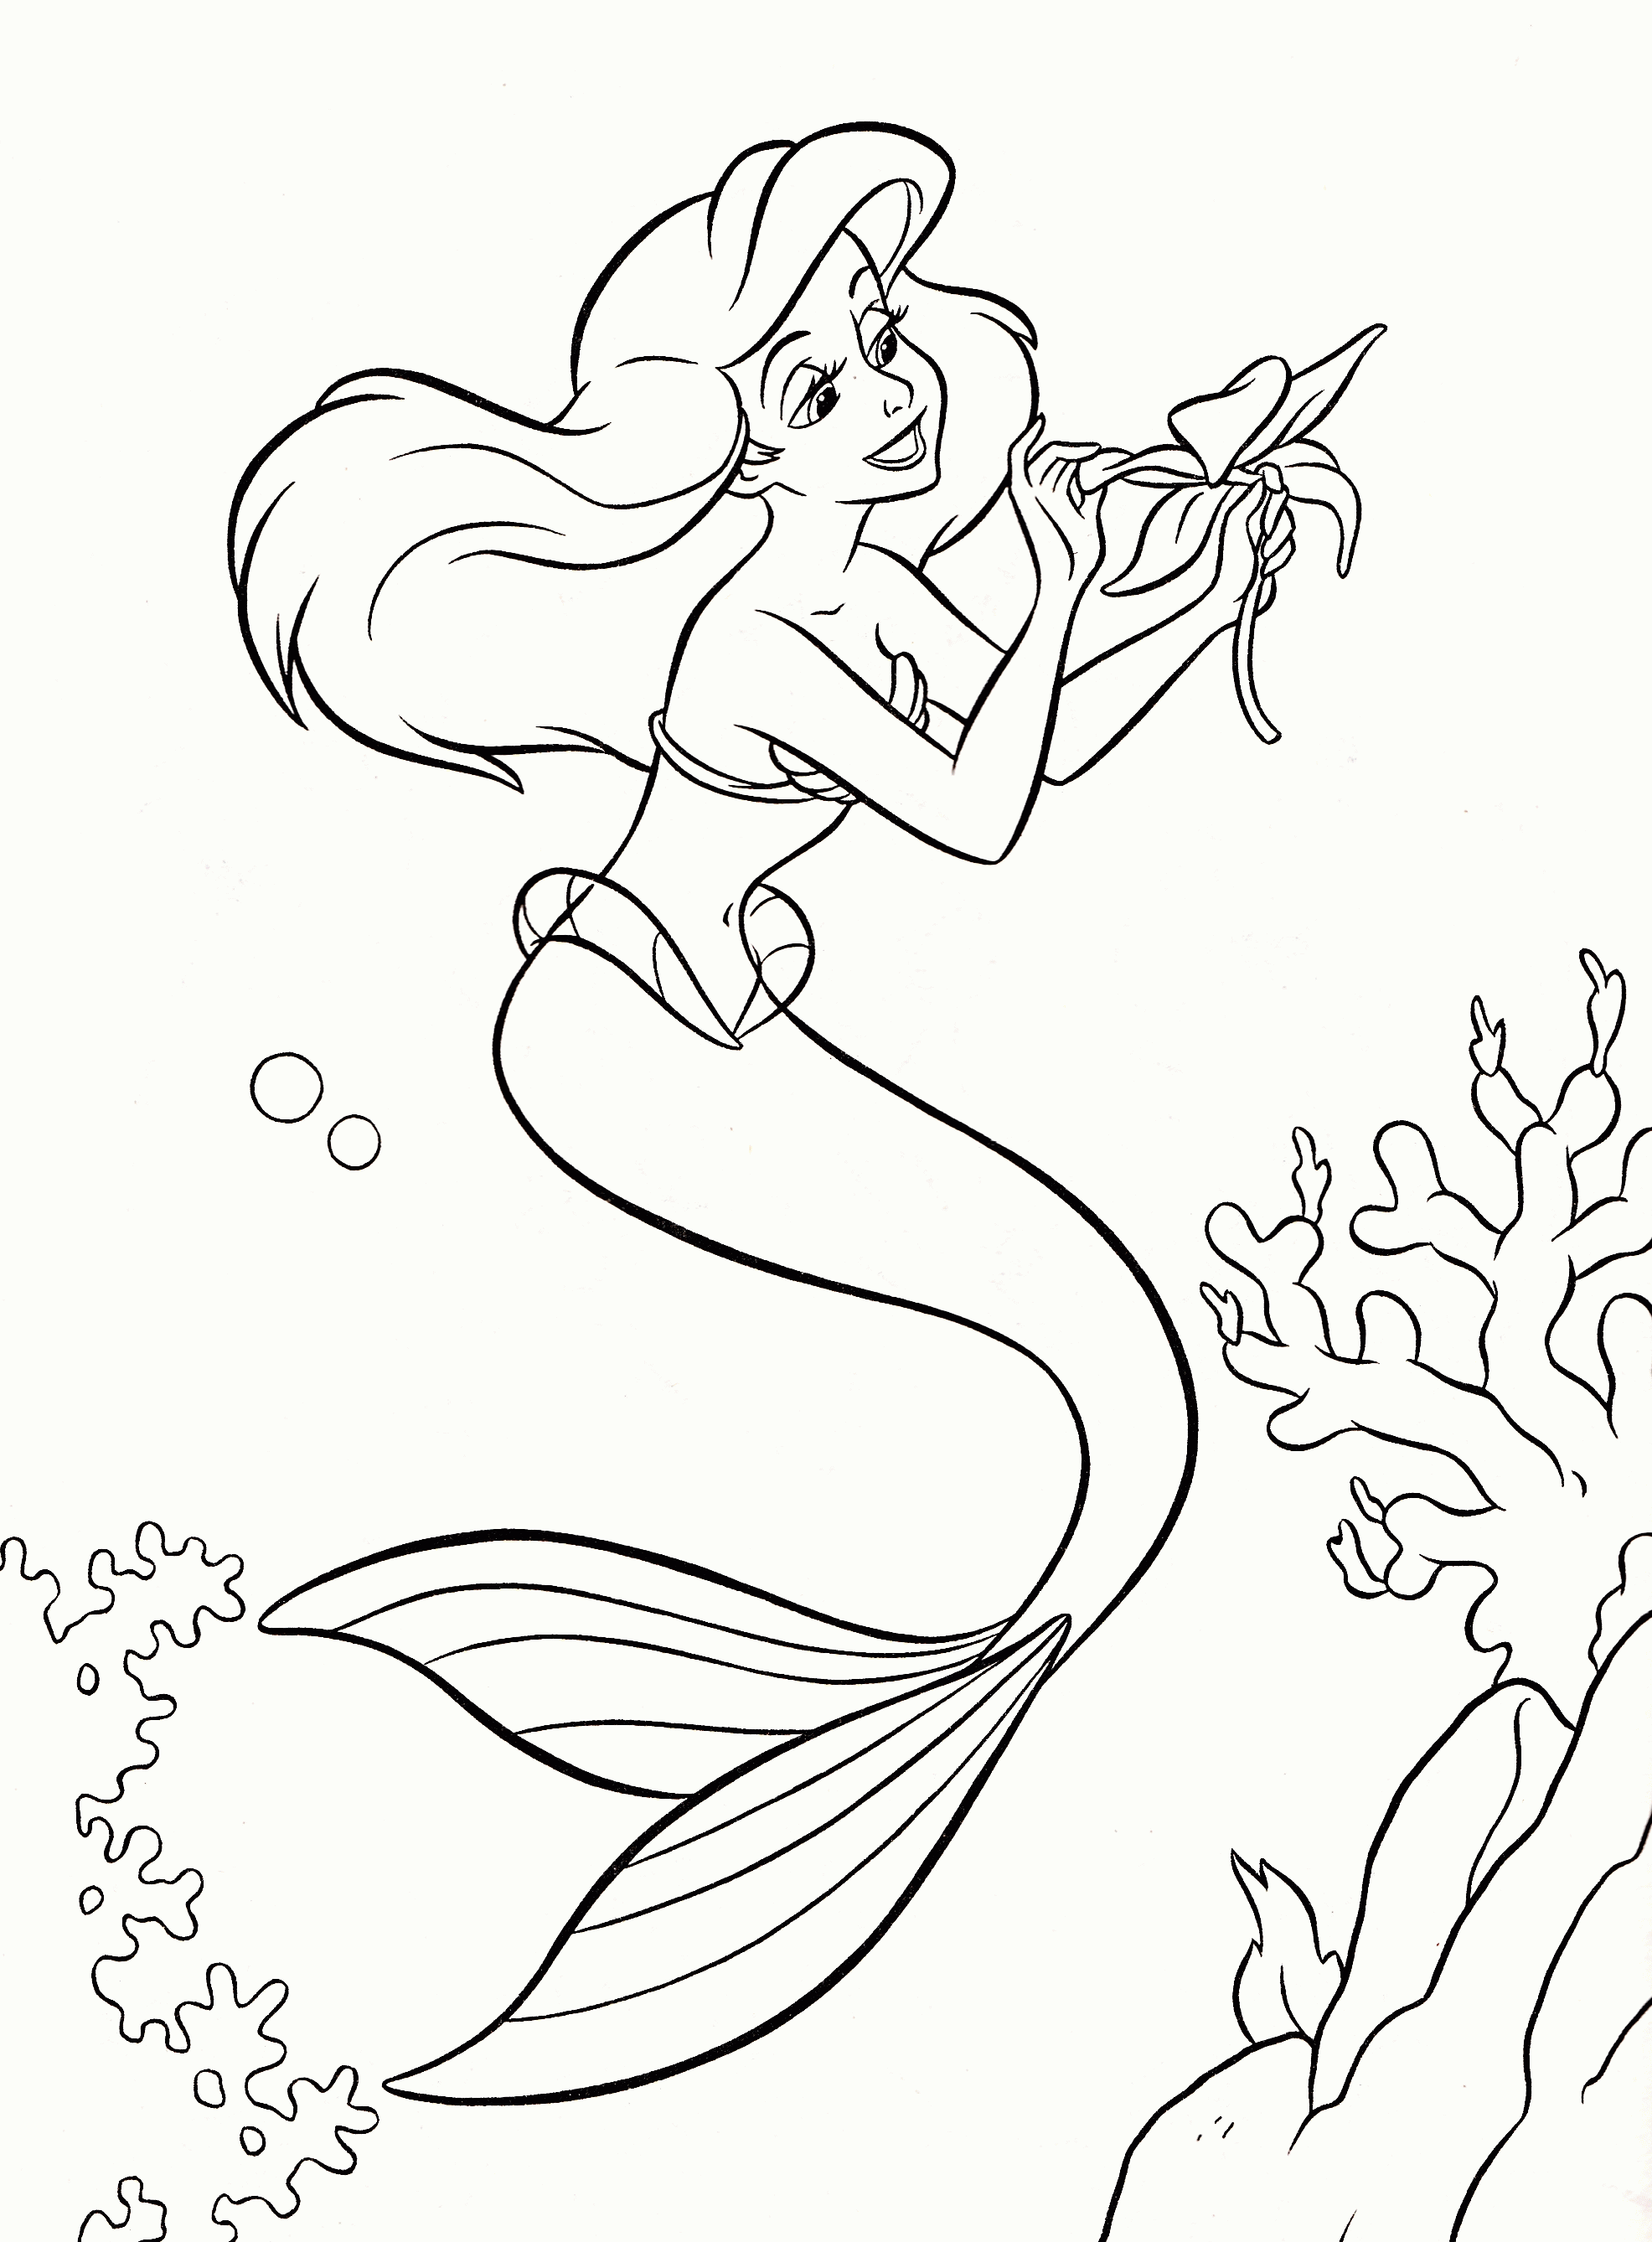 Coloring Pages Of Princesses In Disney   Coloring Page Photos ...